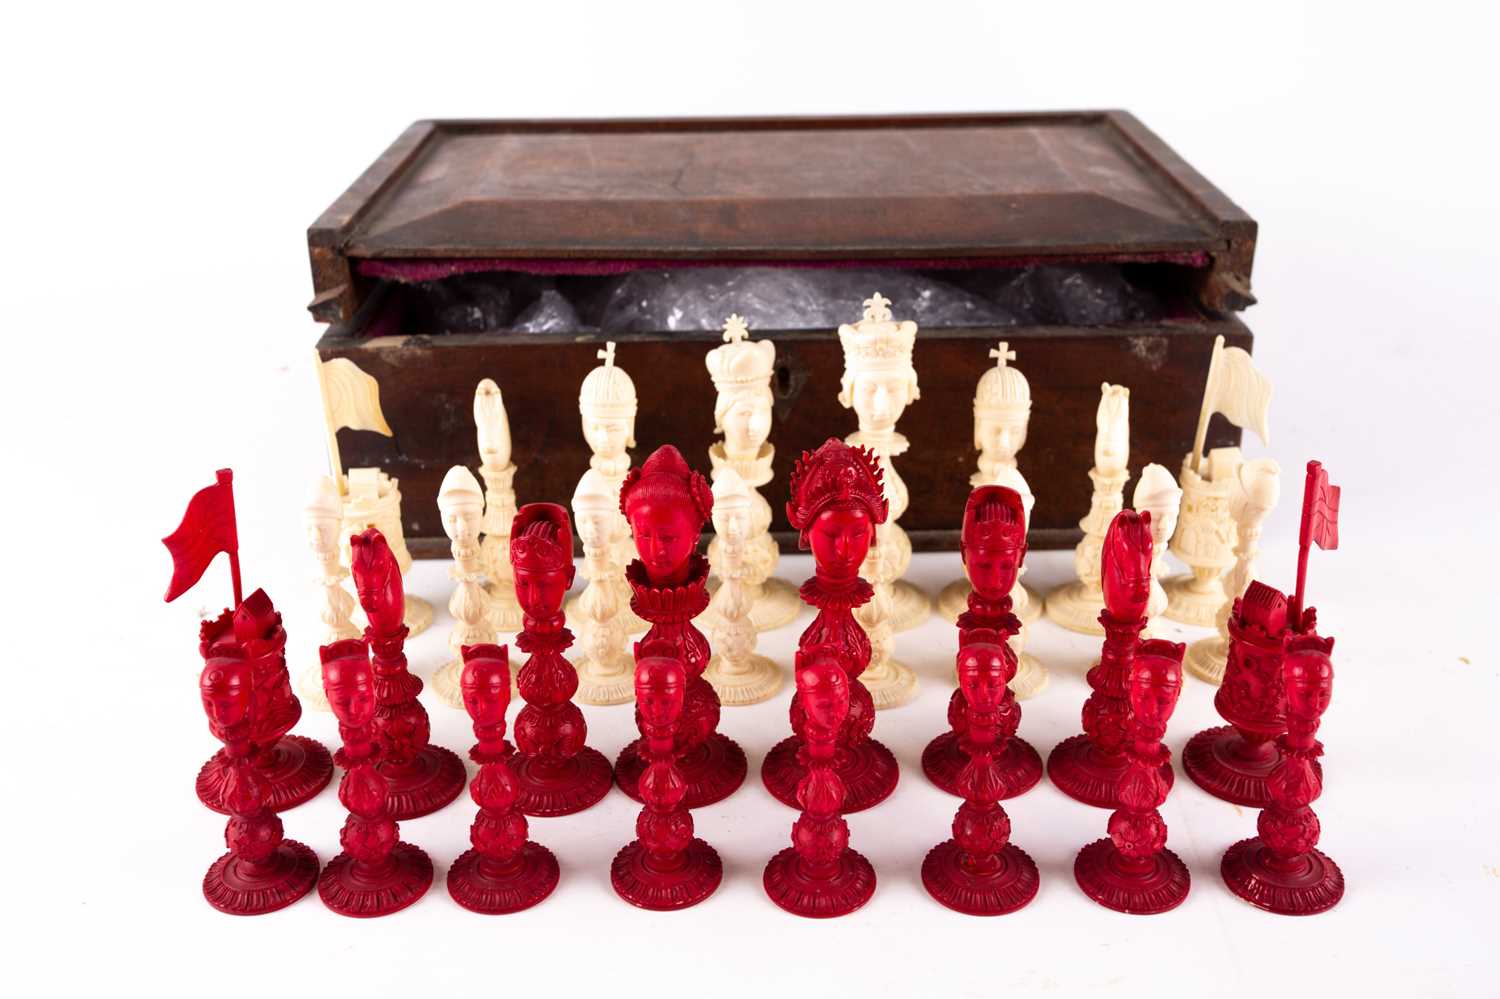 A rare Chinese Canton carved natural and stained ivory figural chess set, 19th century European King Queen buildings carved Chinese Emperor Empress oriental landscapes stems carved foliate knops